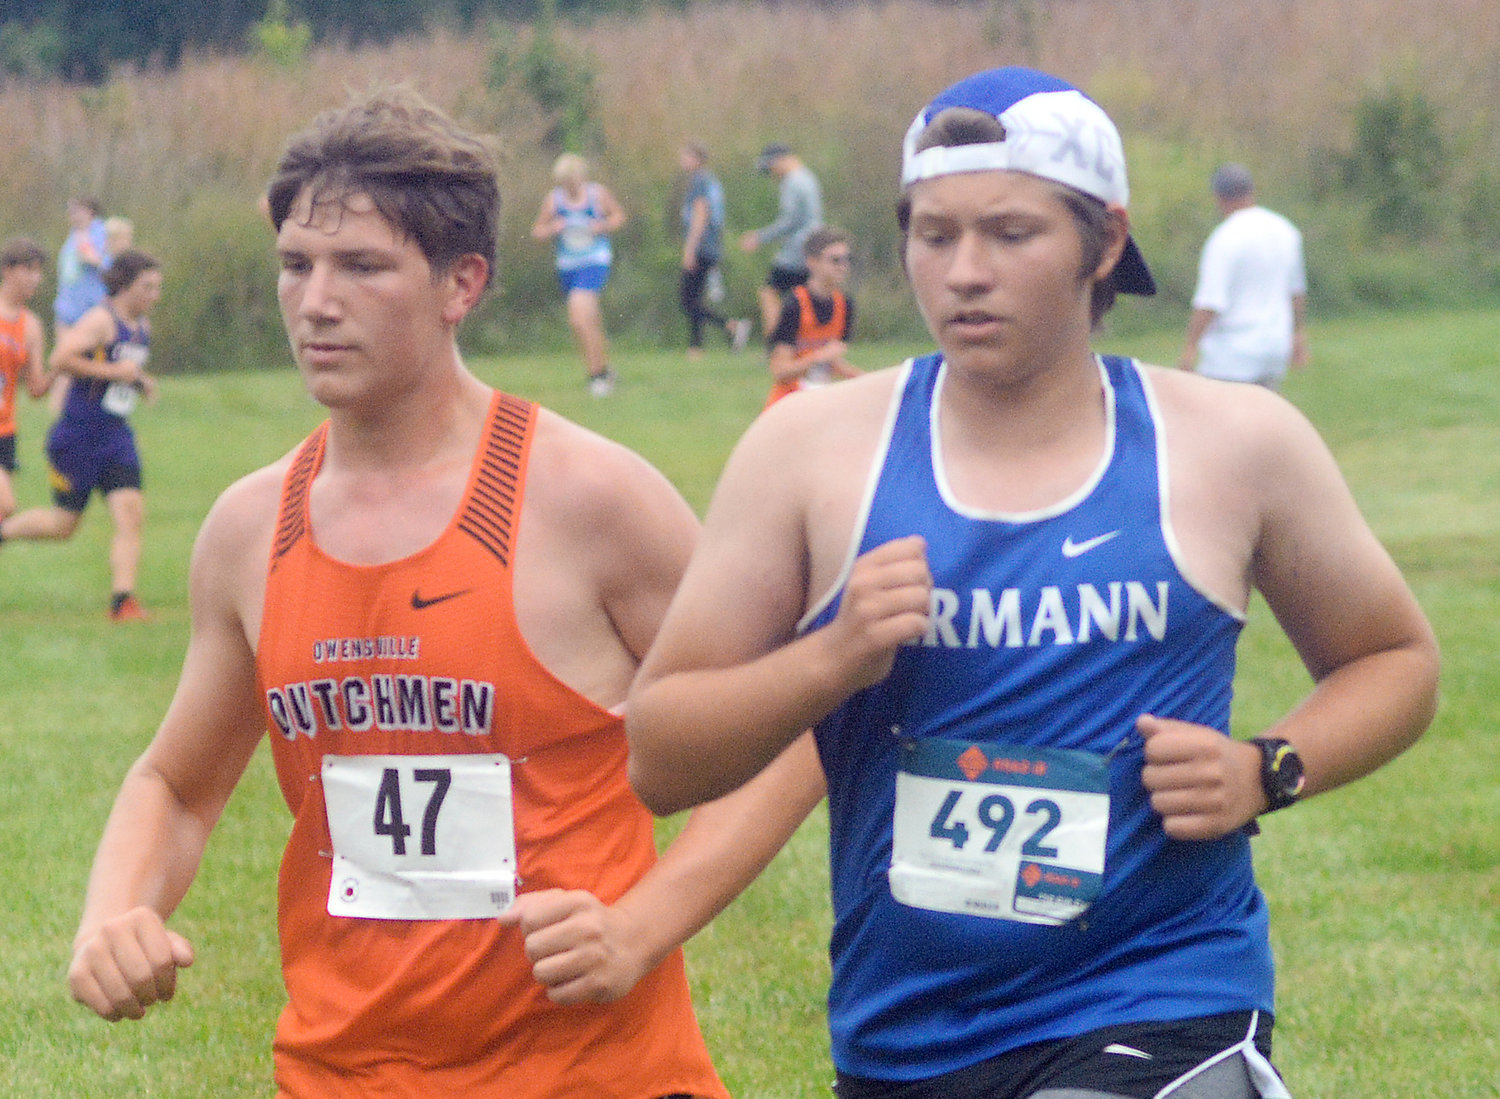 Eli Graham (left) runs right next to Hermann’s Isaiah Brown during the junior varsity boys race at the New Haven Cross Country Invitational Saturday morning at New Haven City Park.